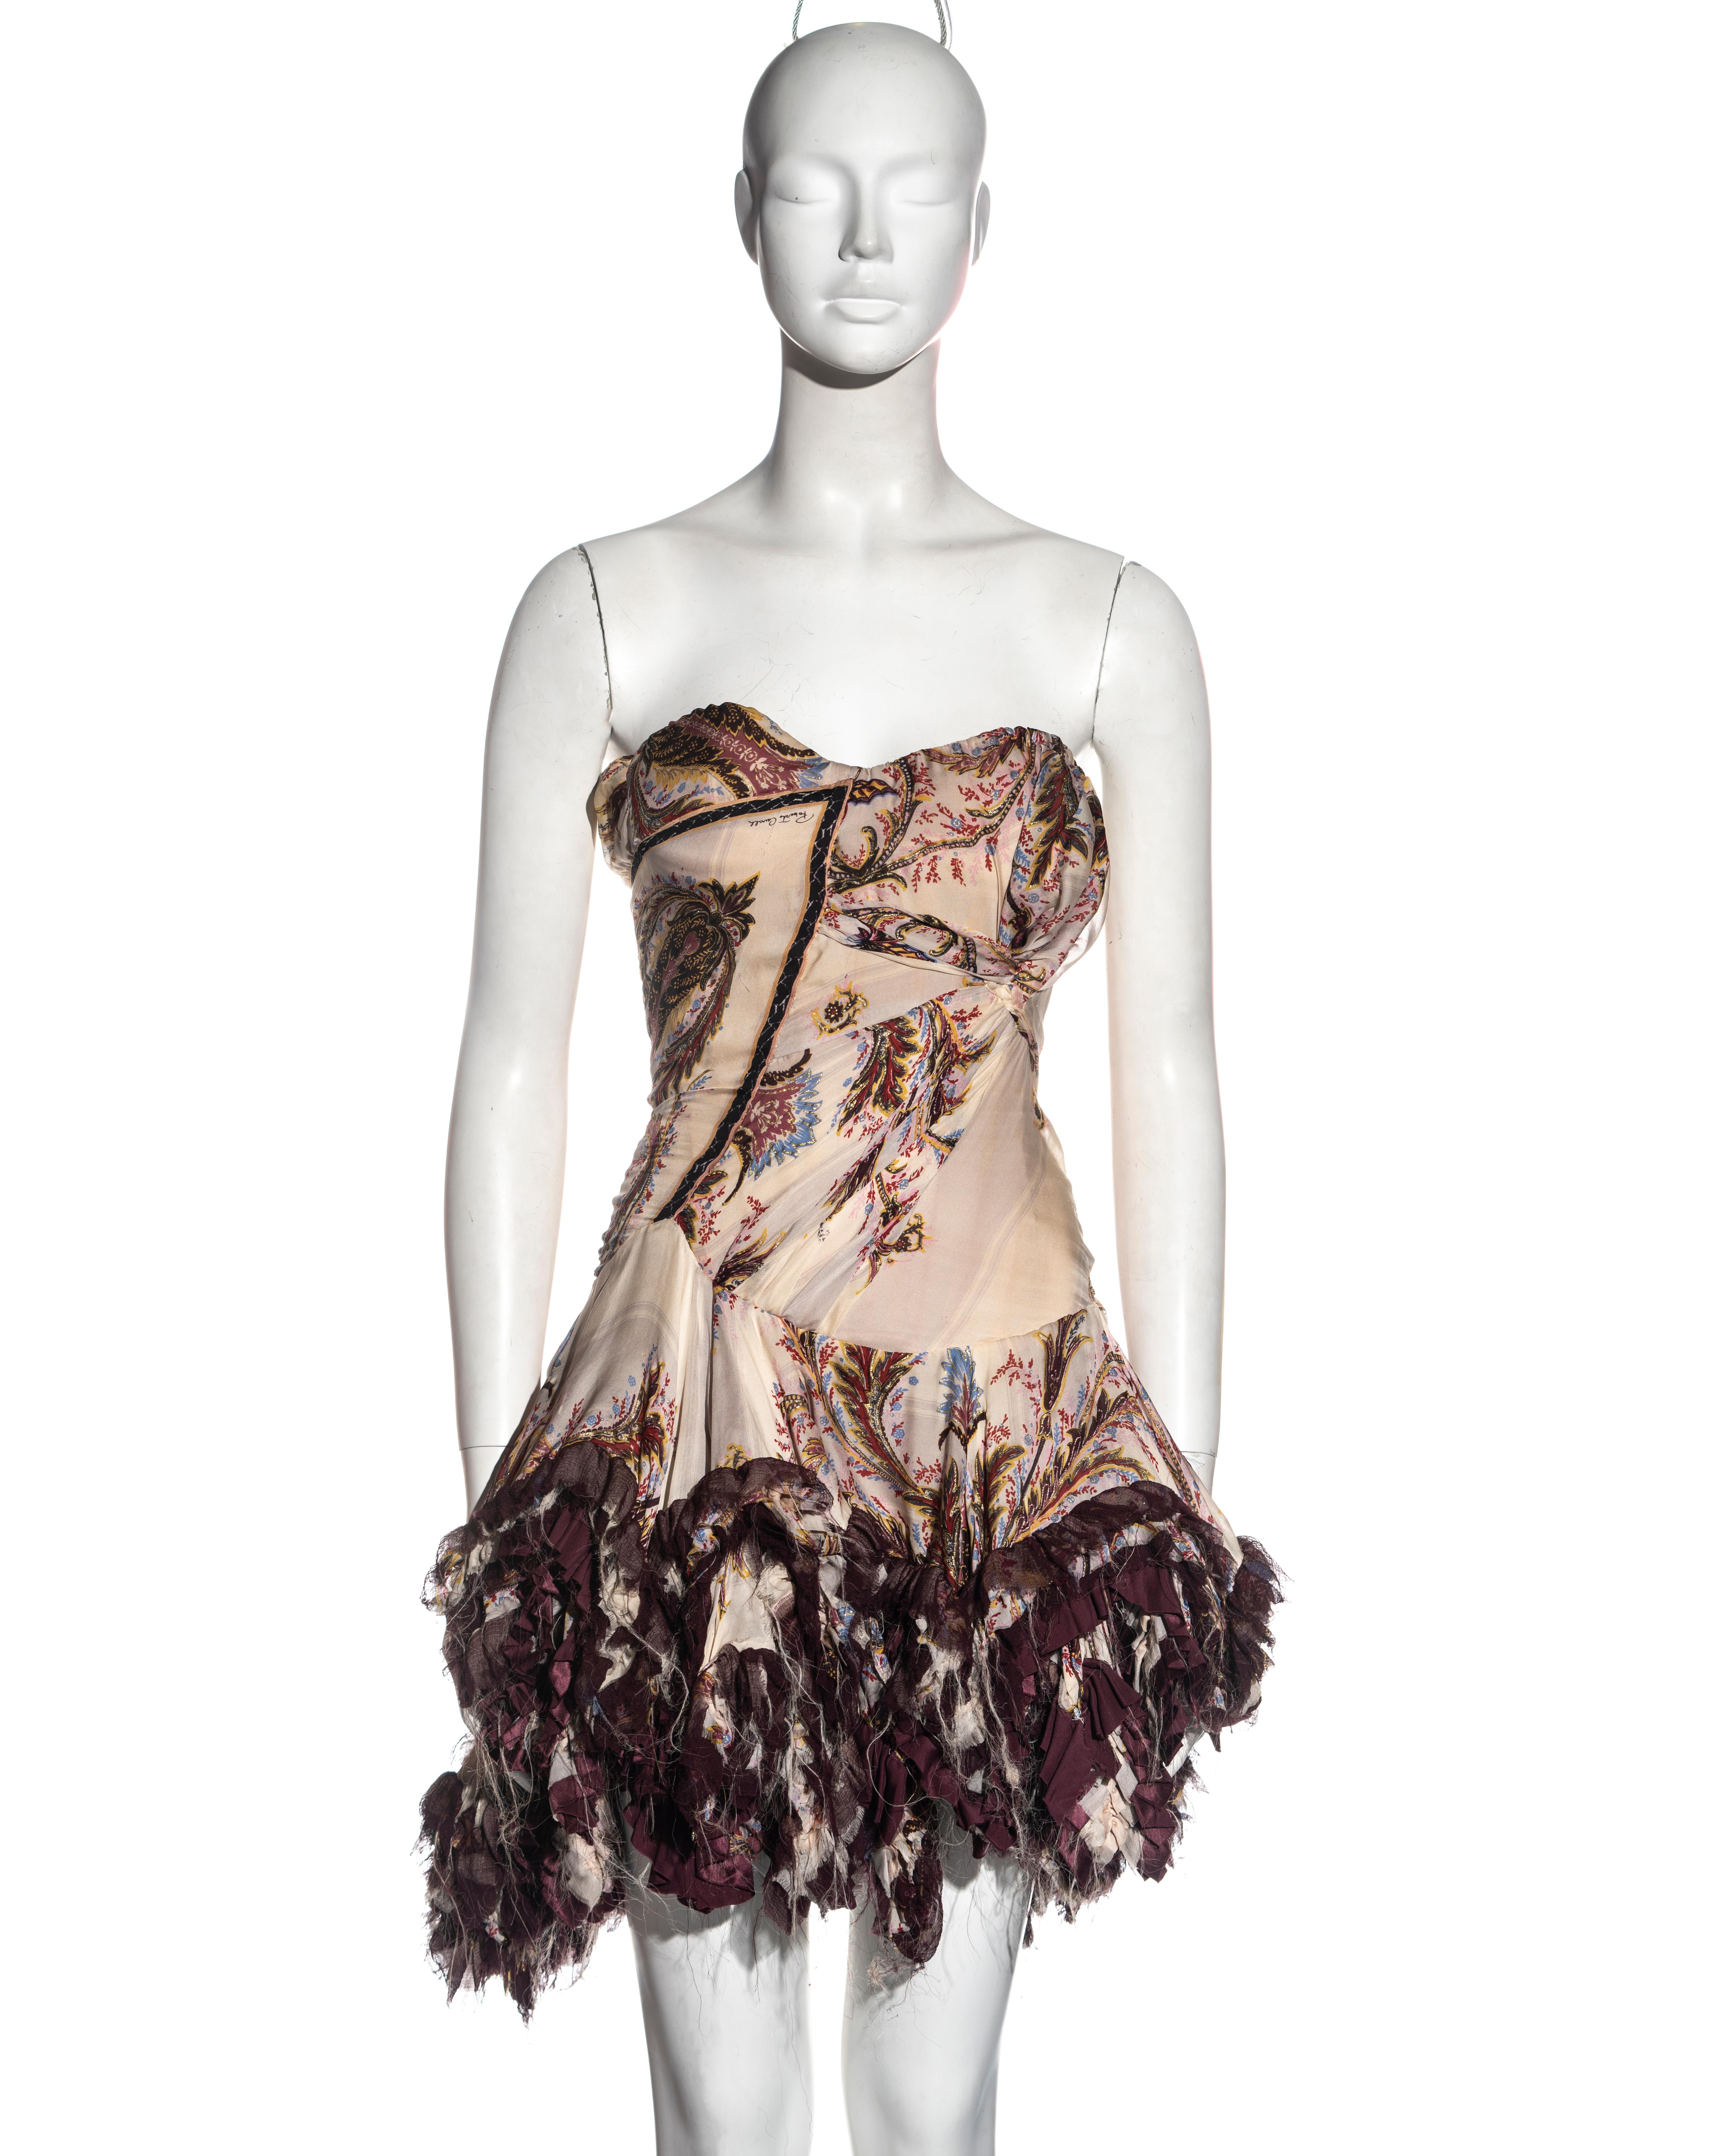 ▪ Roberto Cavalli silk corseted strapless mini dress 
▪ cream, purple and metallic gold brocade printed silk  
▪ Corseted bodice with asymmetric ruching and tucking
▪ Ruffled mini skirt with frayed hem  
▪ Corset lace-up fastening at the back  
▪